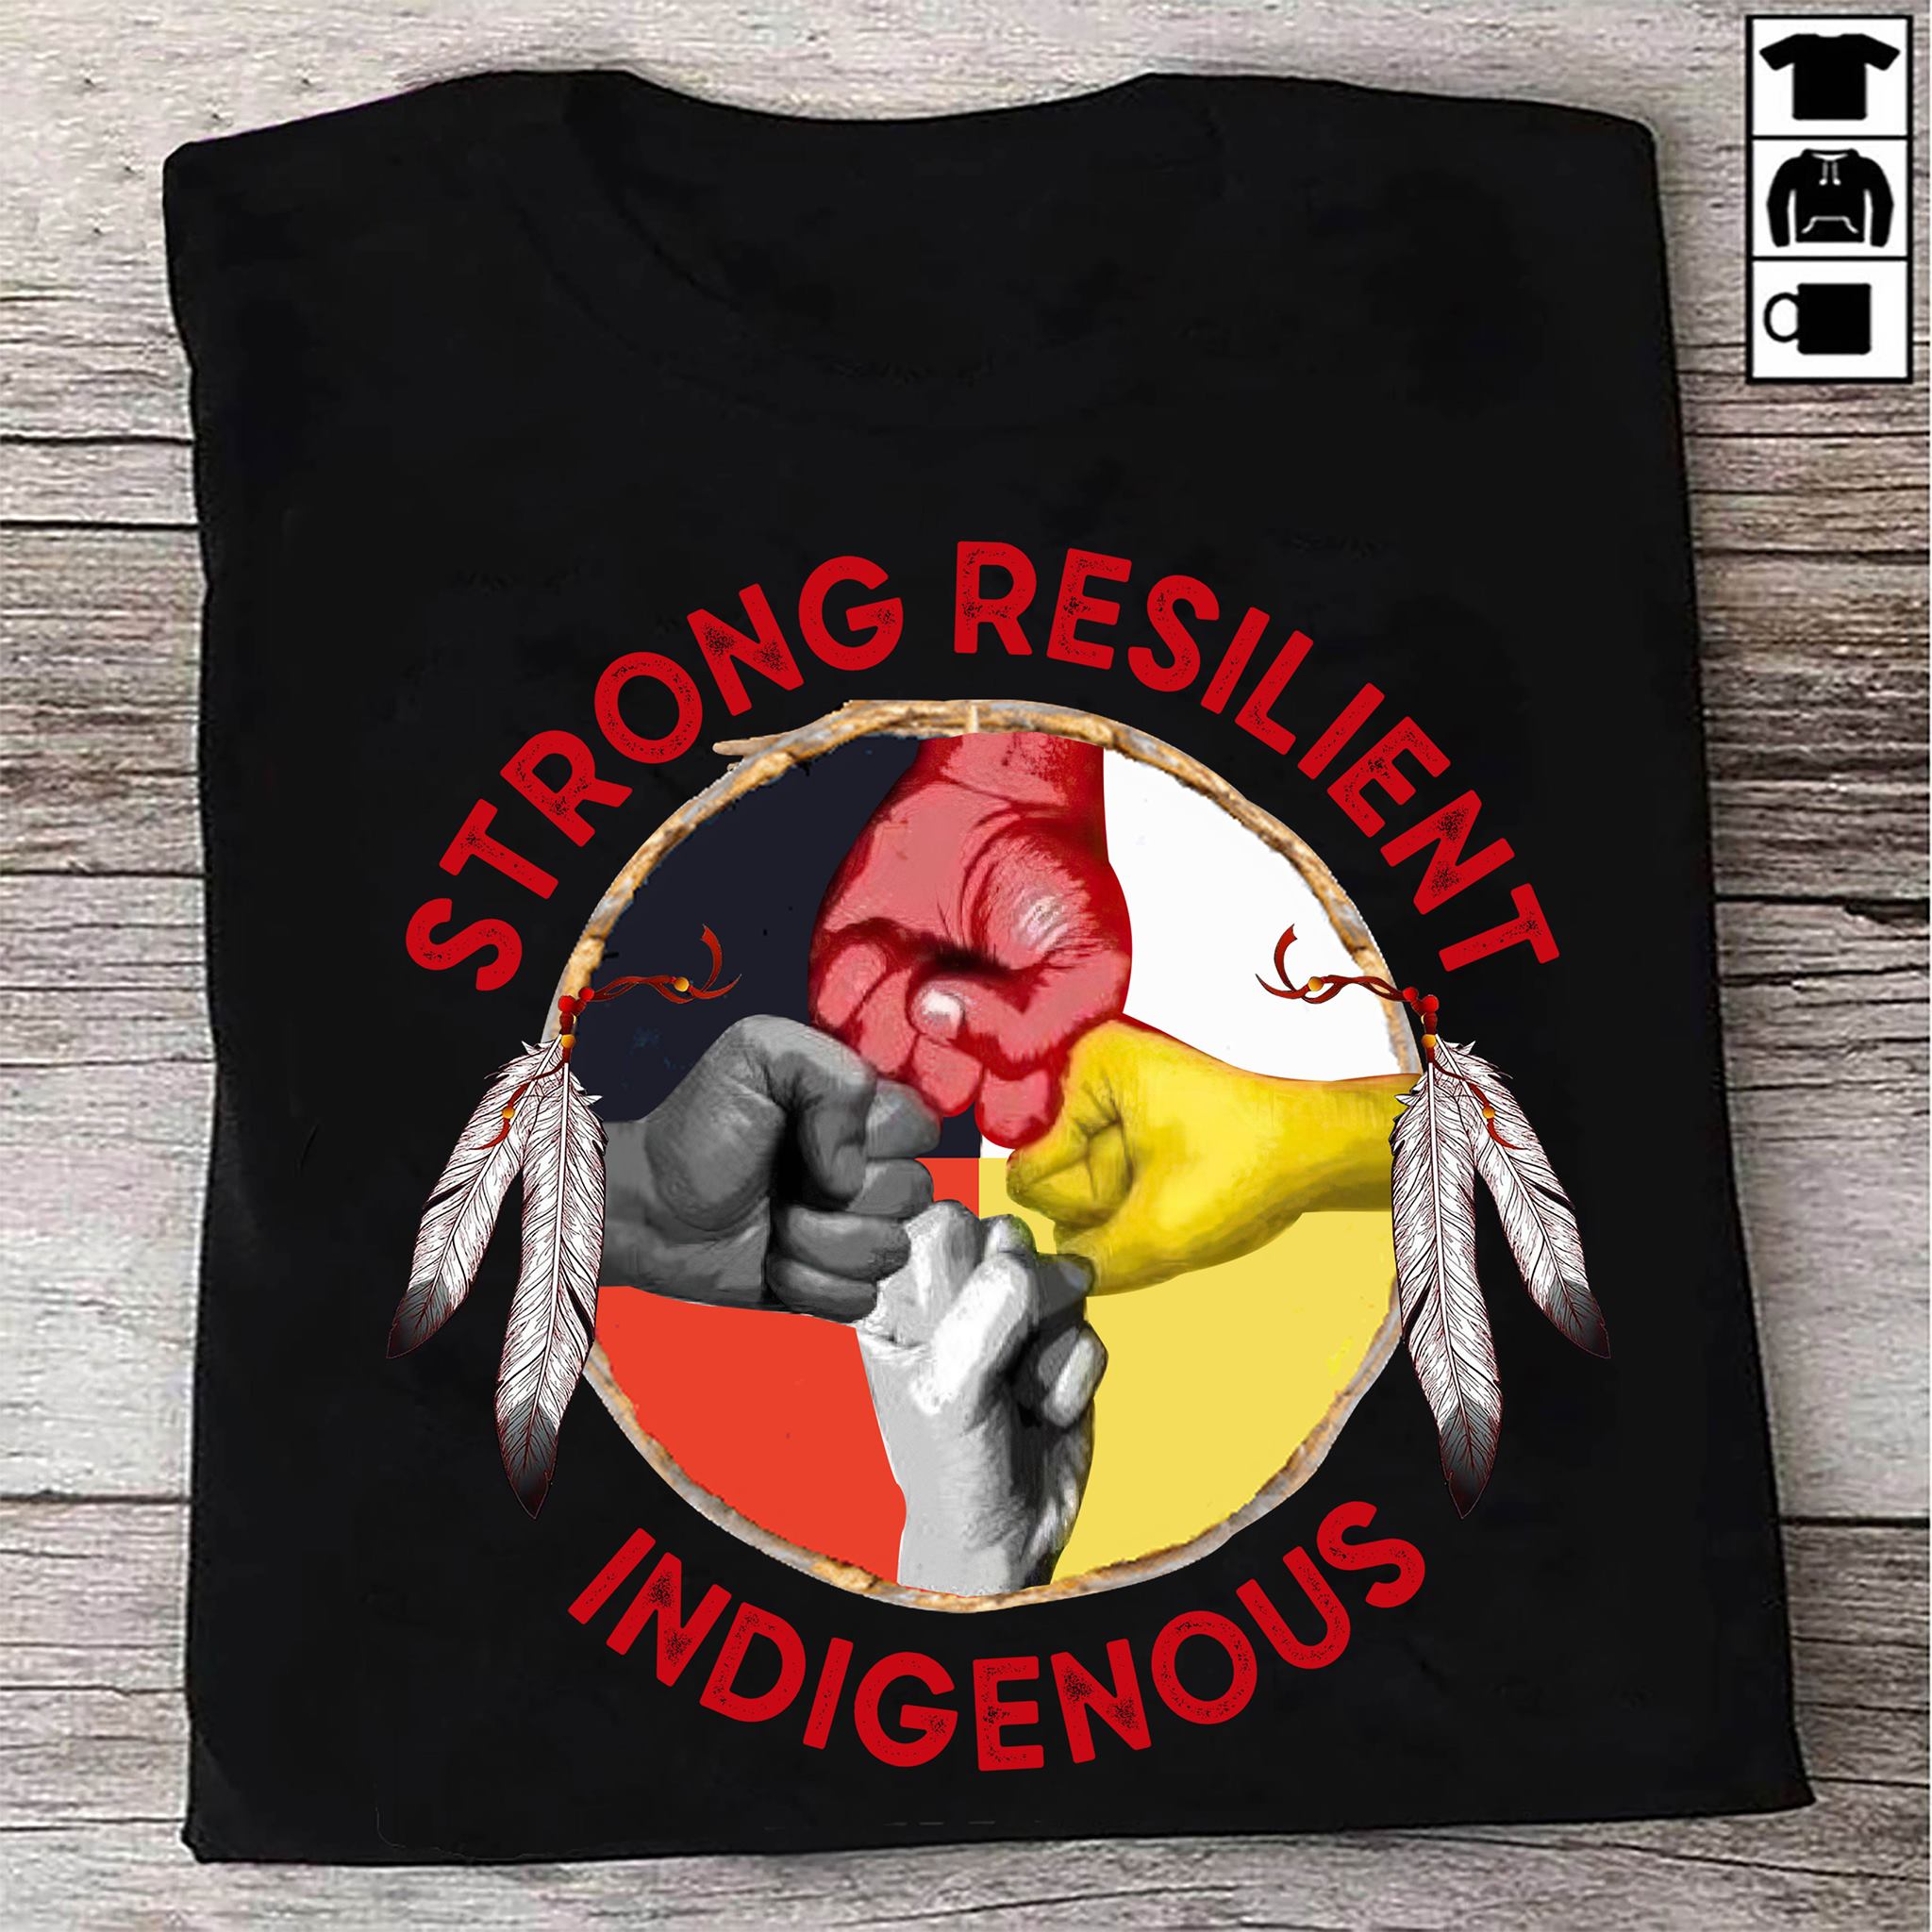 Strong resilient indigenous - Native American